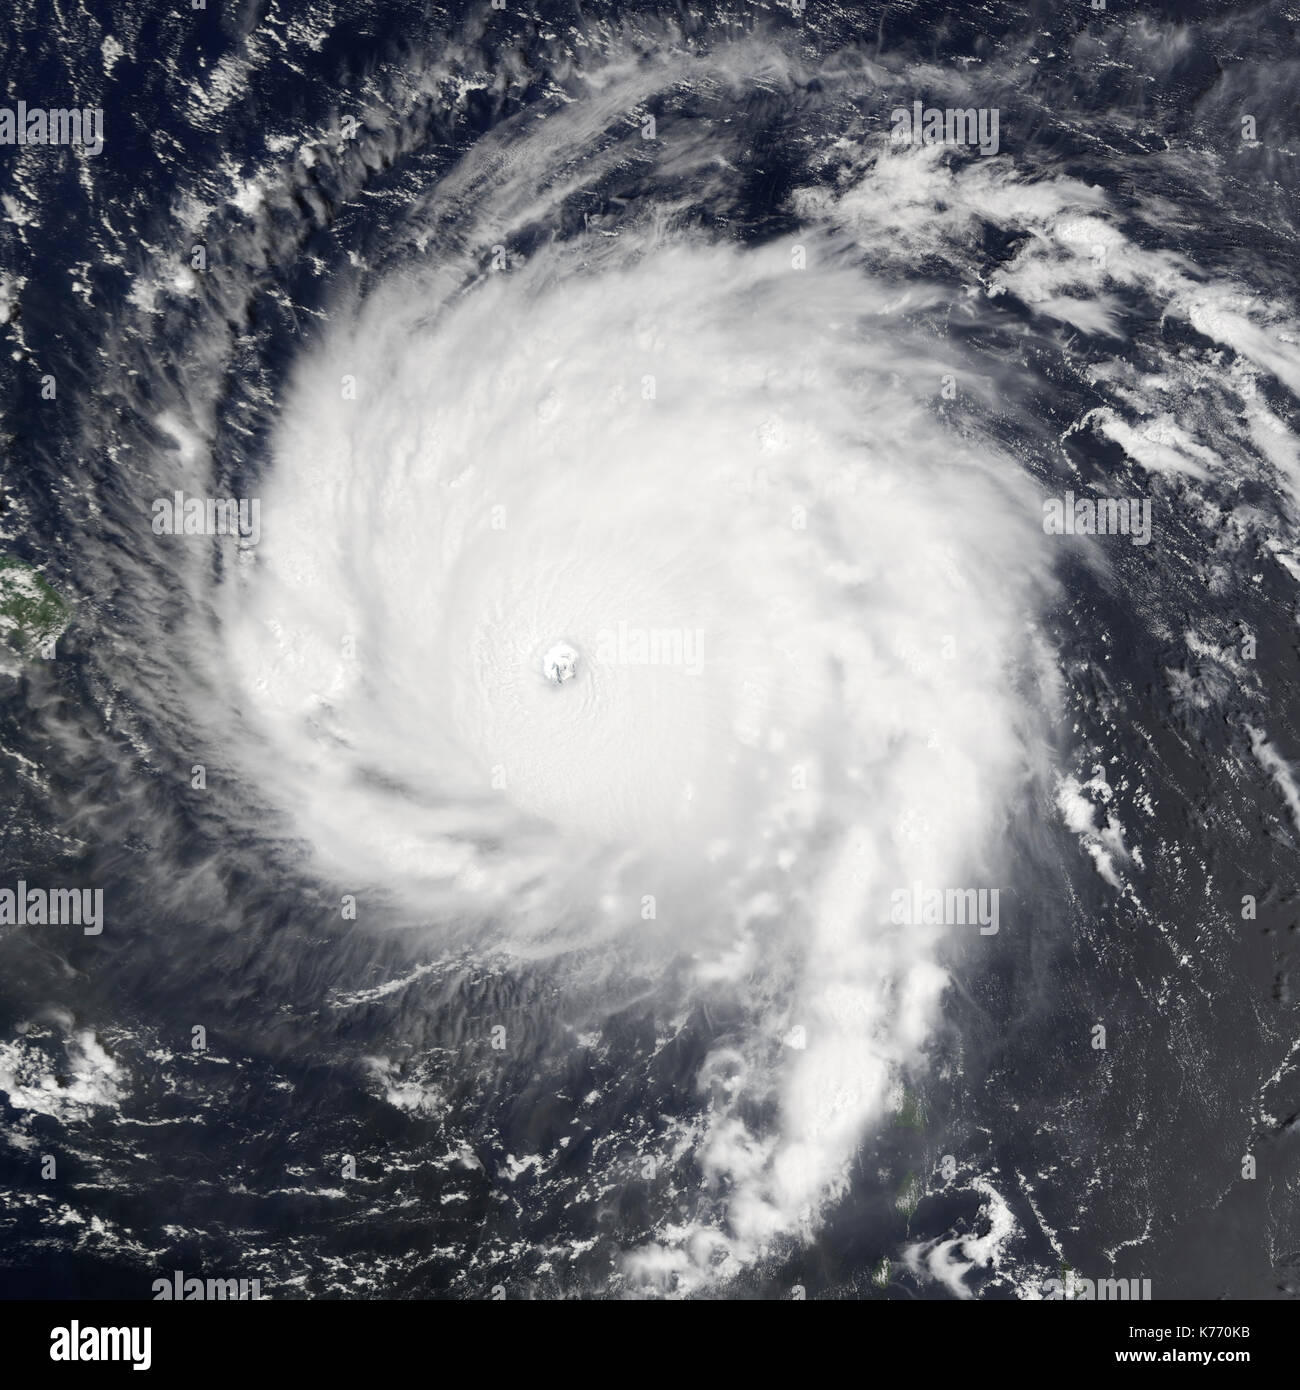 Hurricane Irma over the Leeward Islands captured by NASA on Wednesday, September 6, 2017. Irma is the strongest hurricanes ever measured over the Atlantic Ocean. T(NASA/Suomi NPP - VIIRS) Stock Photo